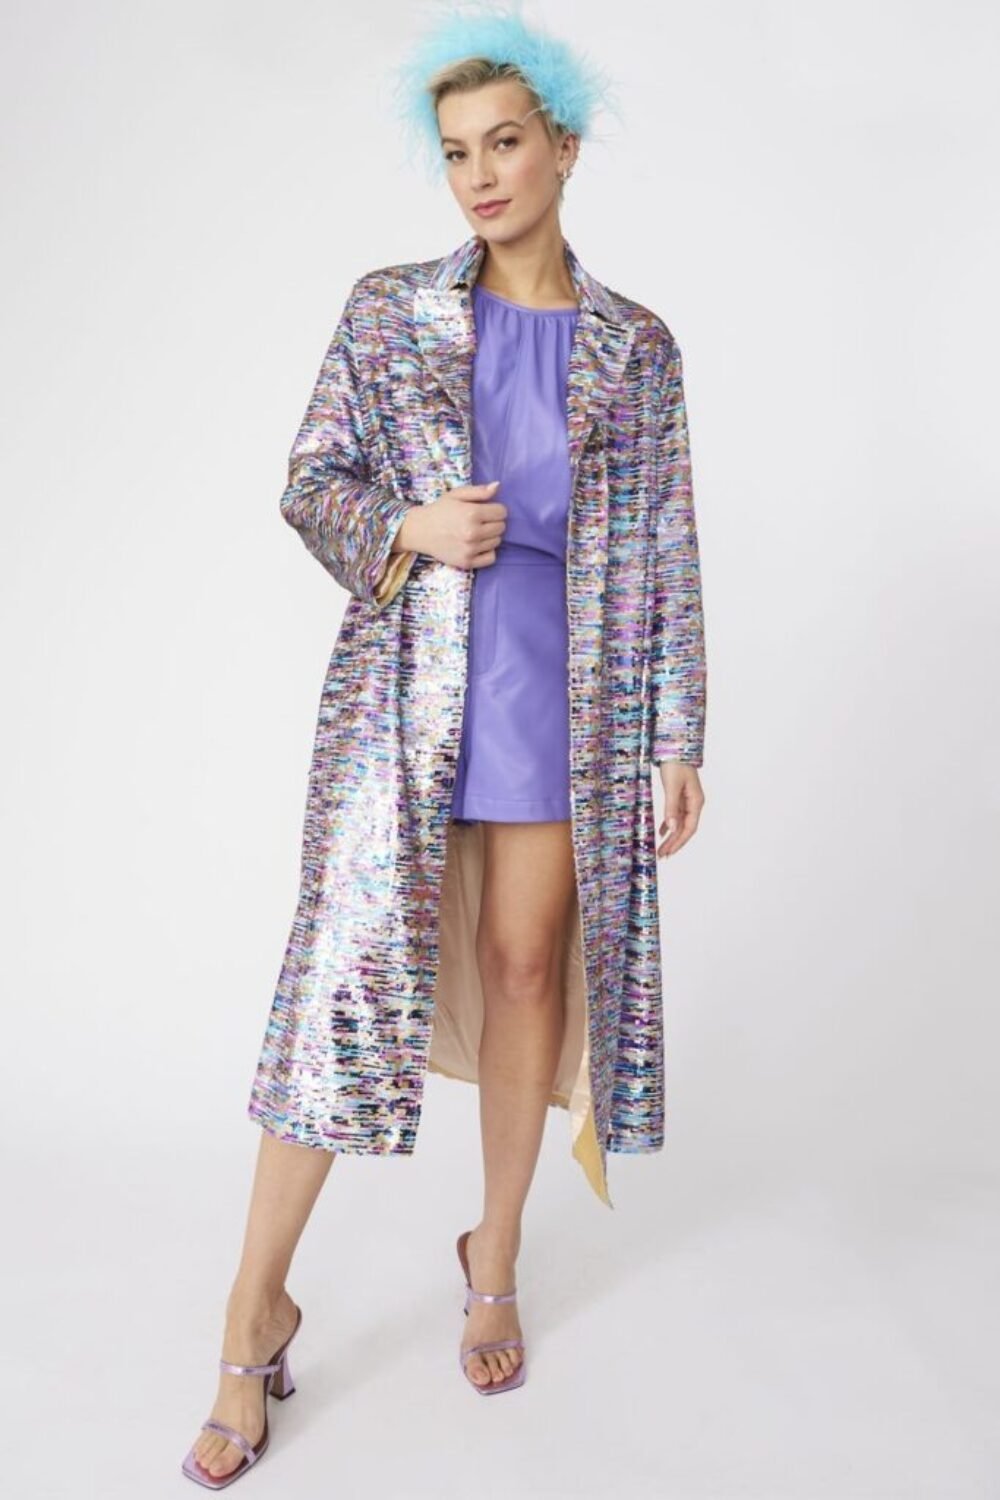 Shop Lux Purple Multi Coloured Sequin Trench Coat and women's luxury and designer clothes at www.lux-apparel.co.uk